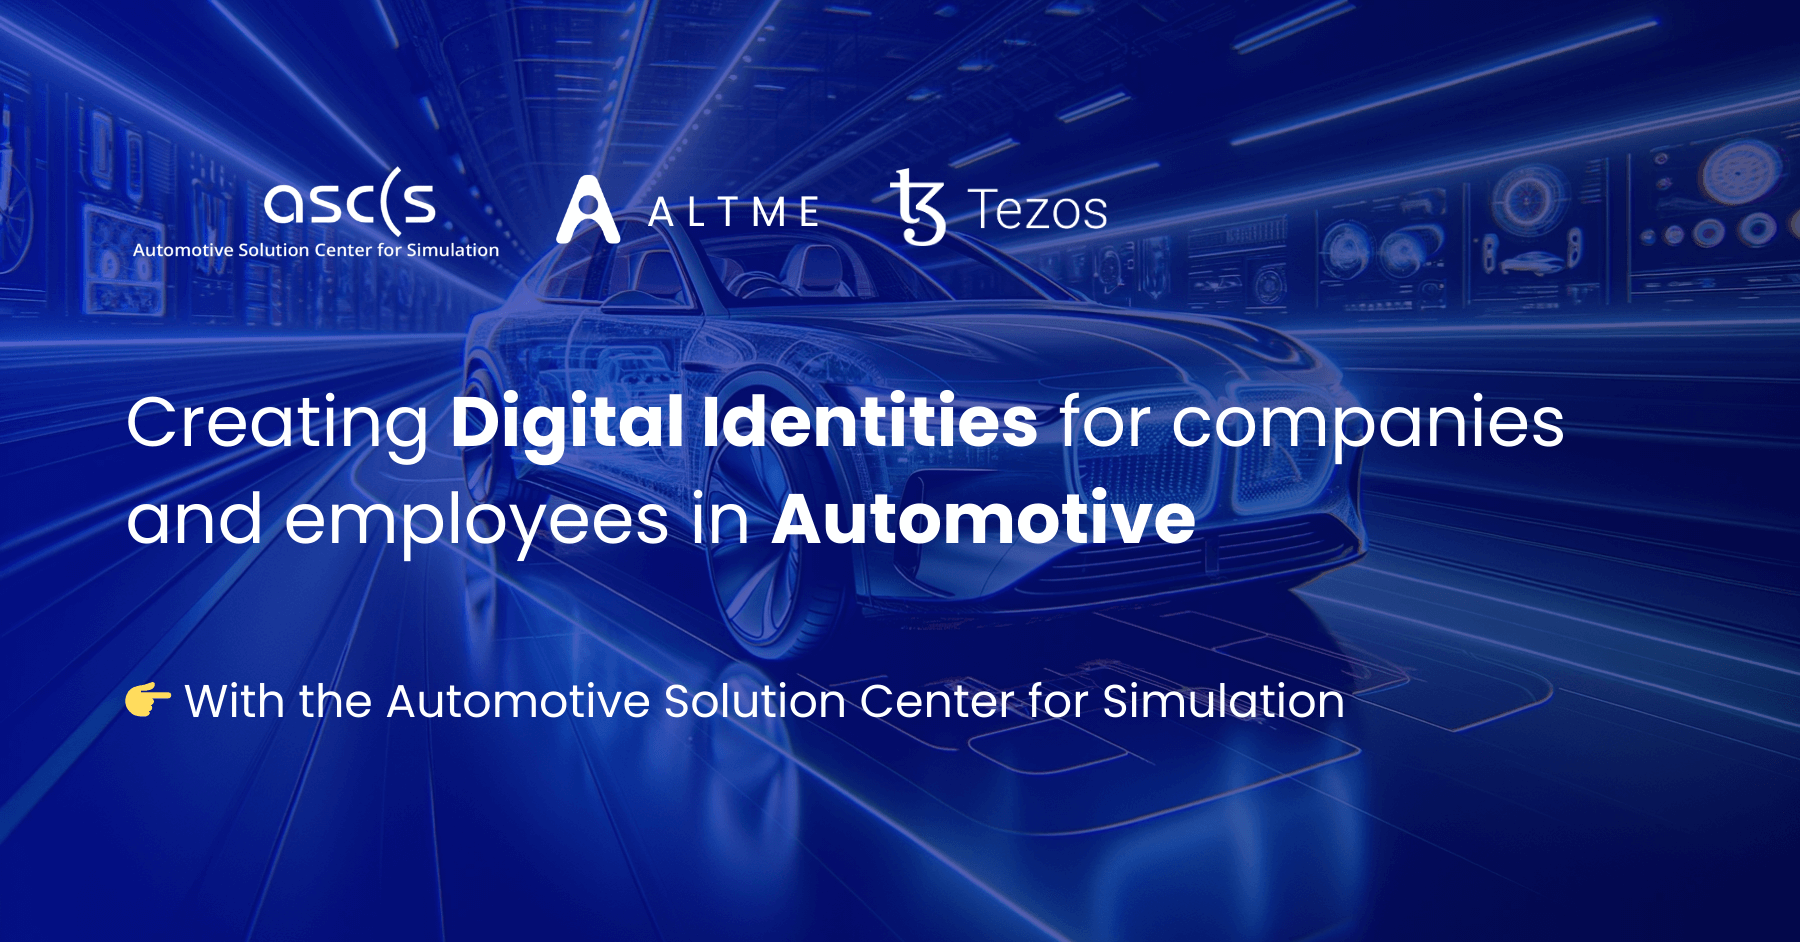 Creating reliable digital identities with Altme, ASCS and Tezos